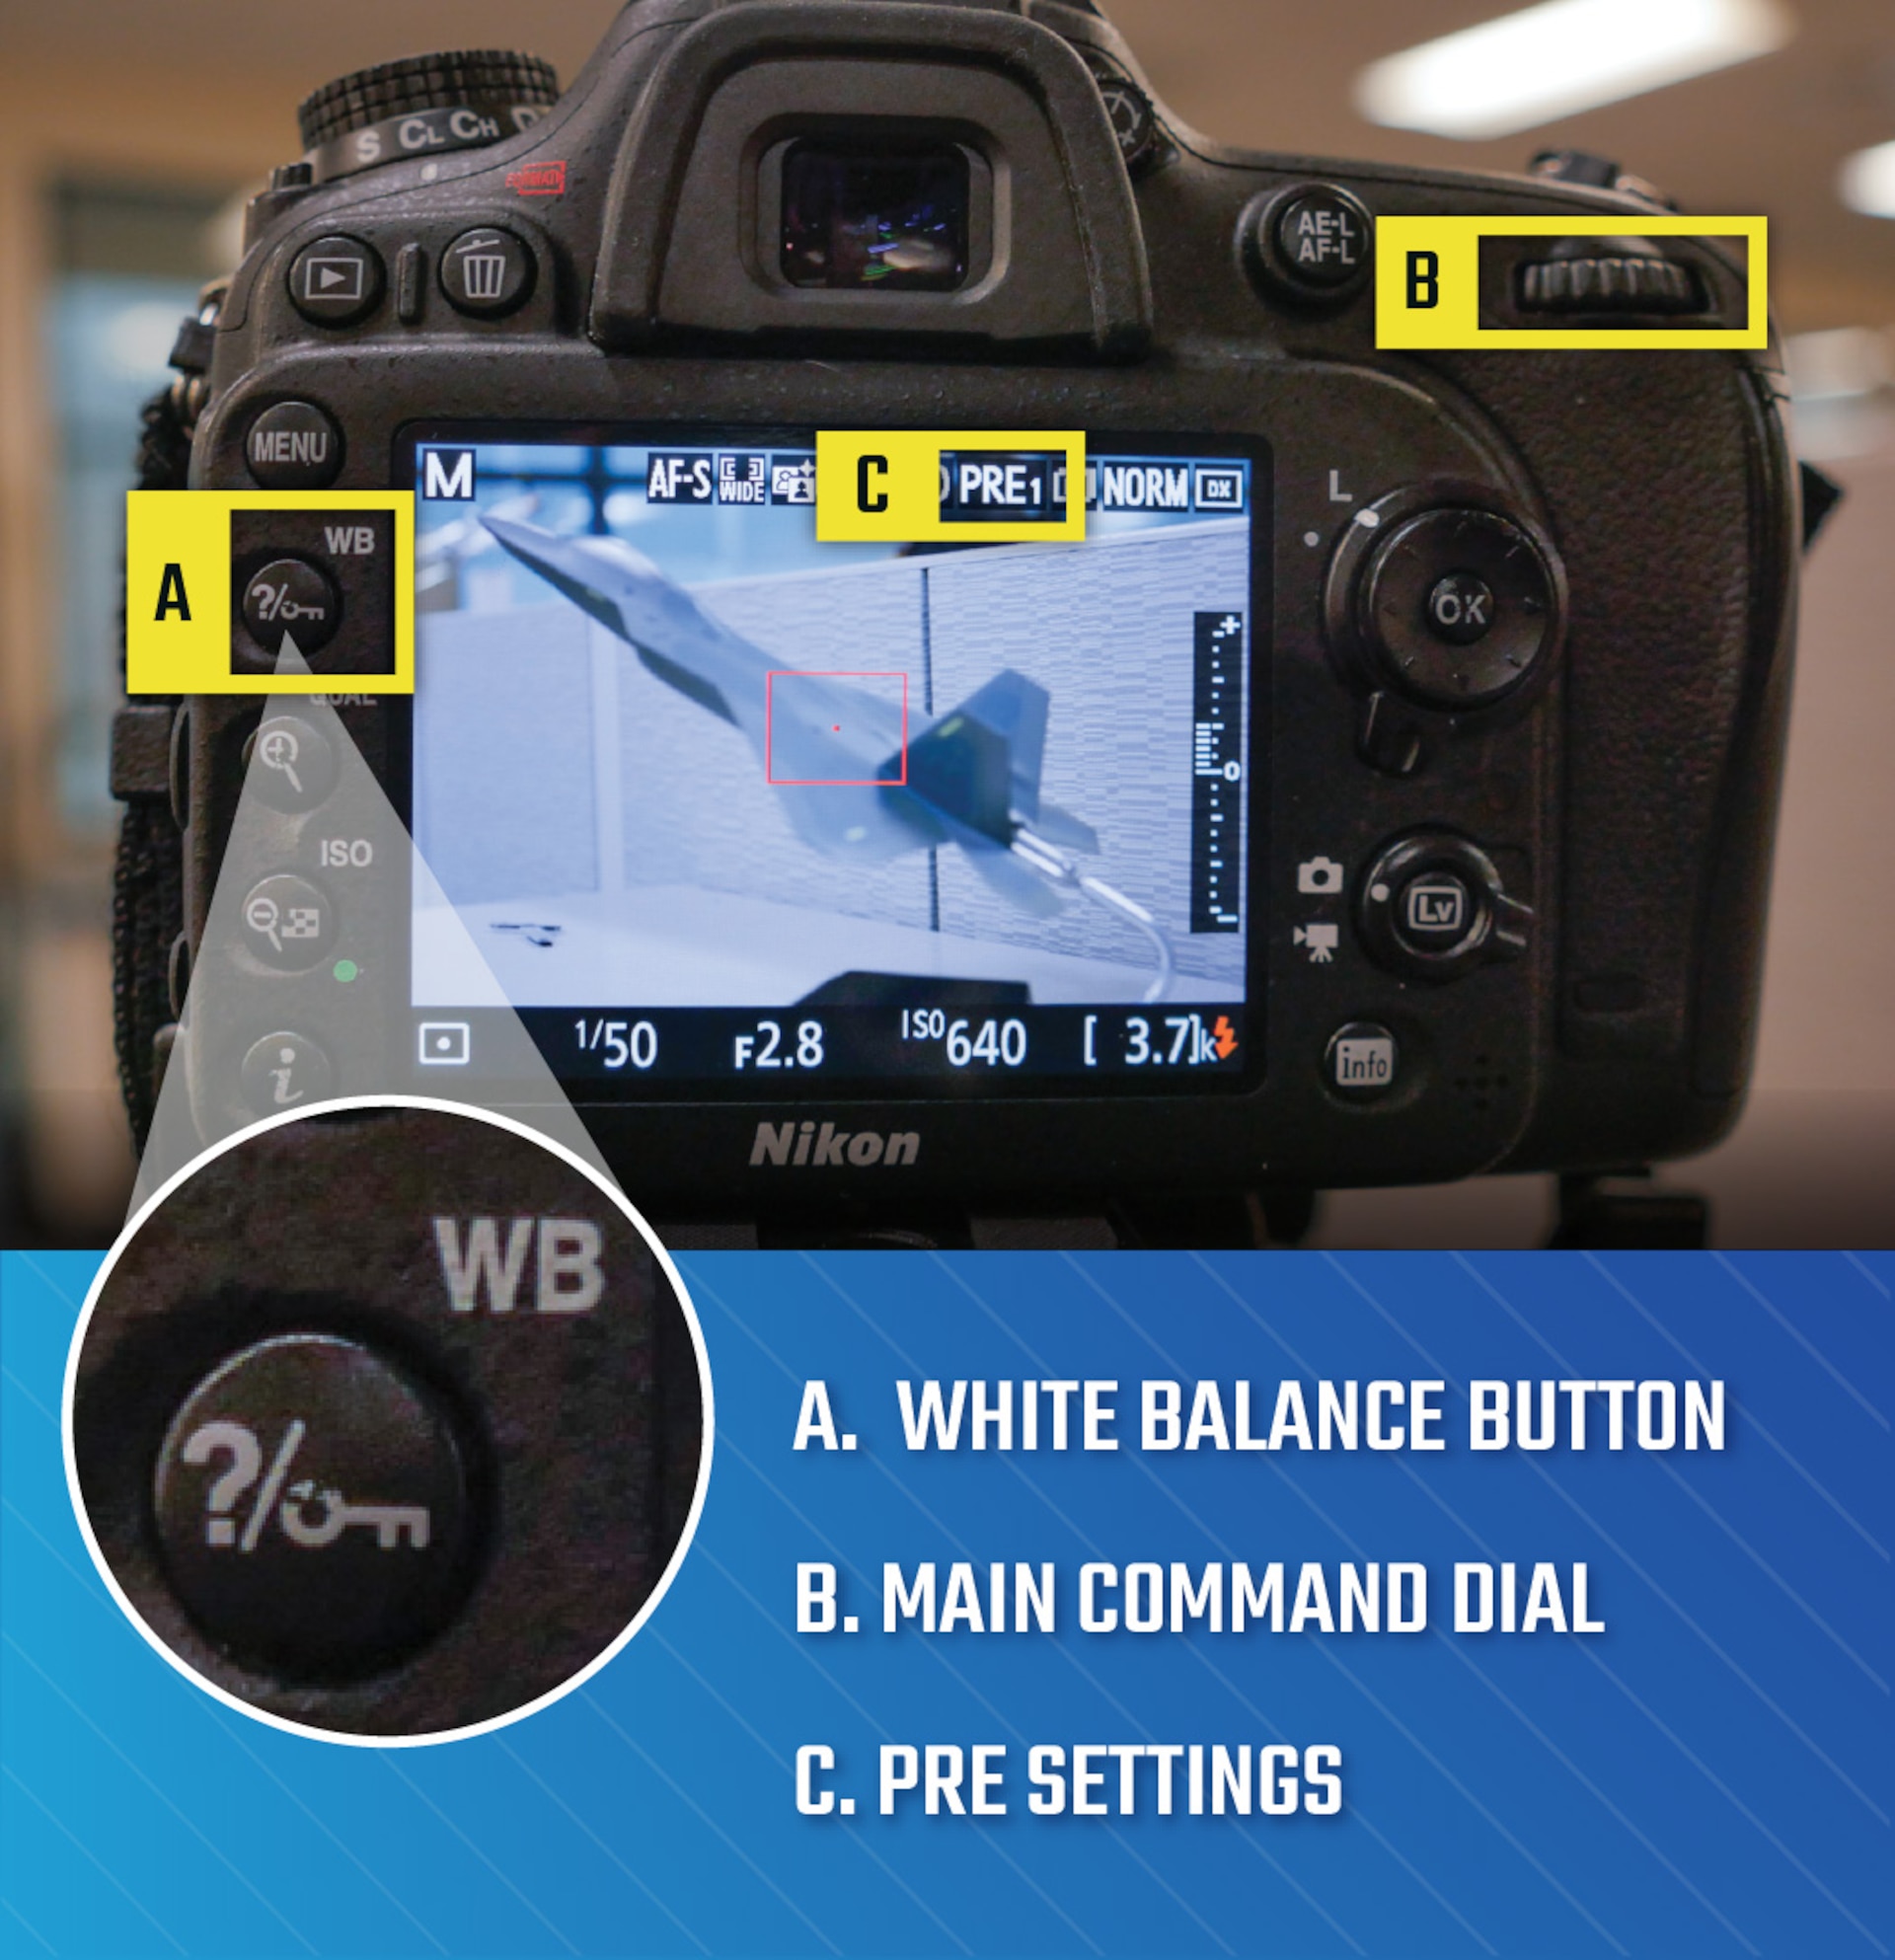 Camera with points to white balance button, main command dial and pre settings mode on display screen